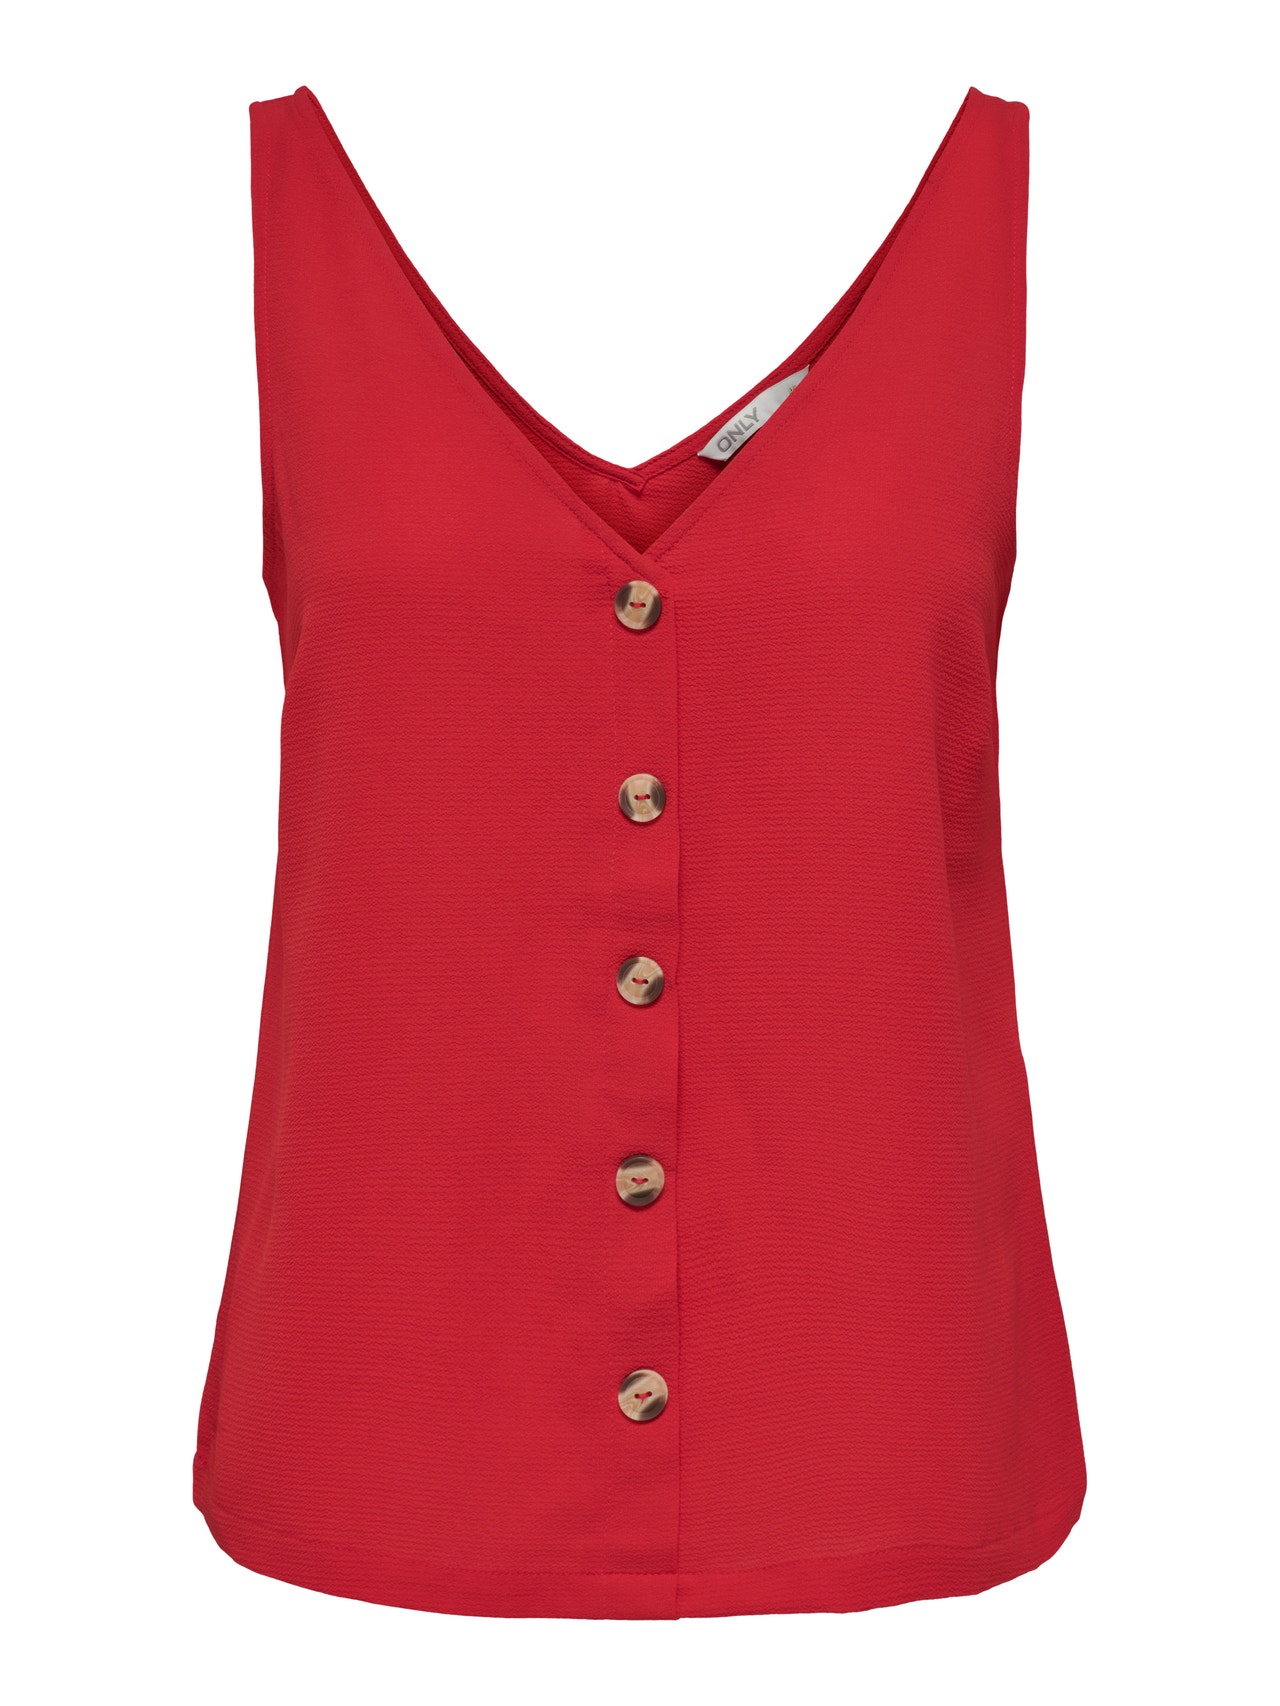 ONLY Button detail Top -Mars Red - 15230066